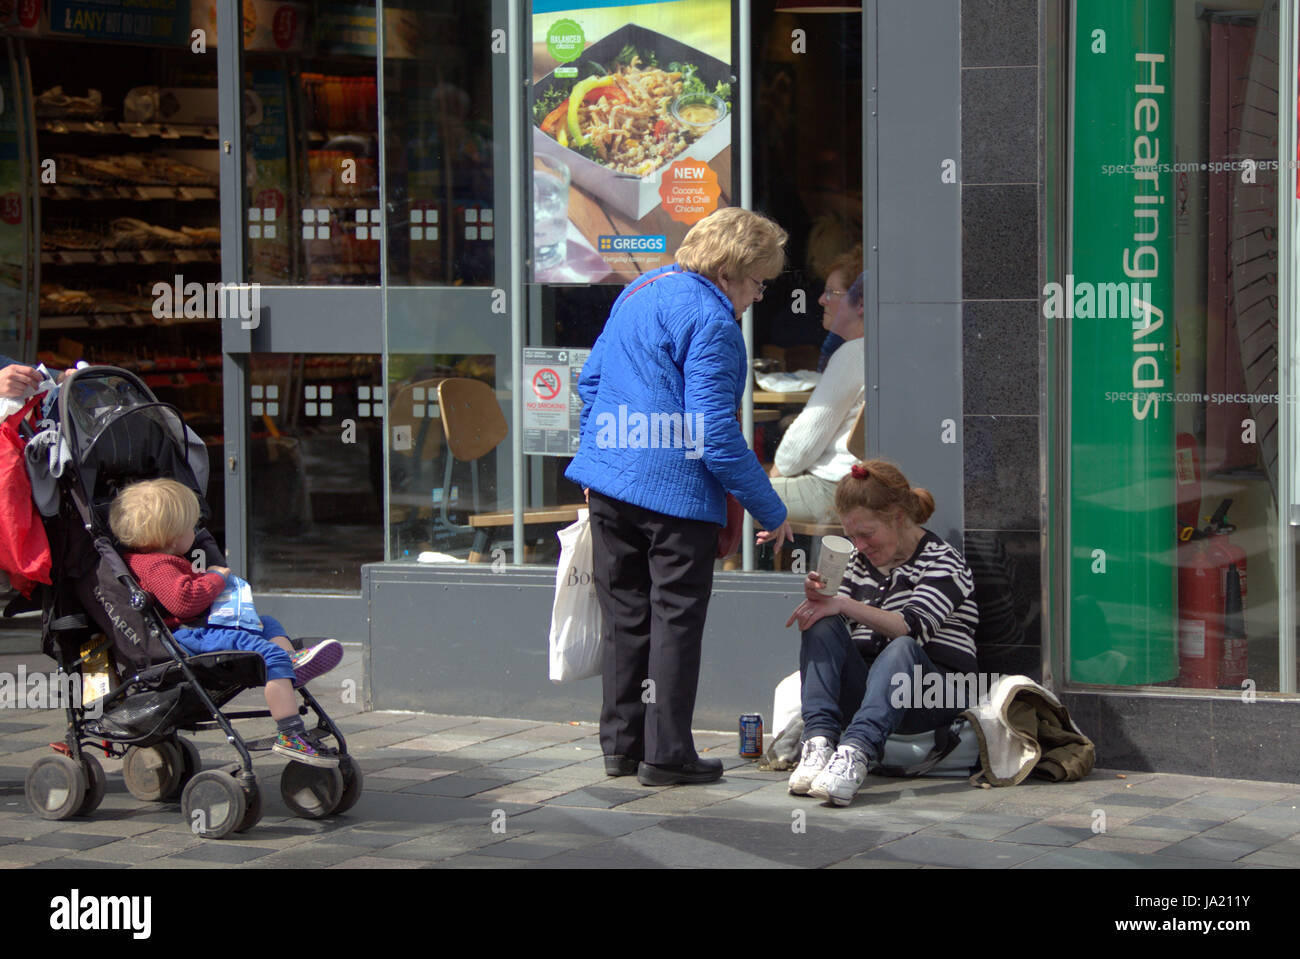 homeless in the uk begging on the street  old lady helping witnessed by child Stock Photo